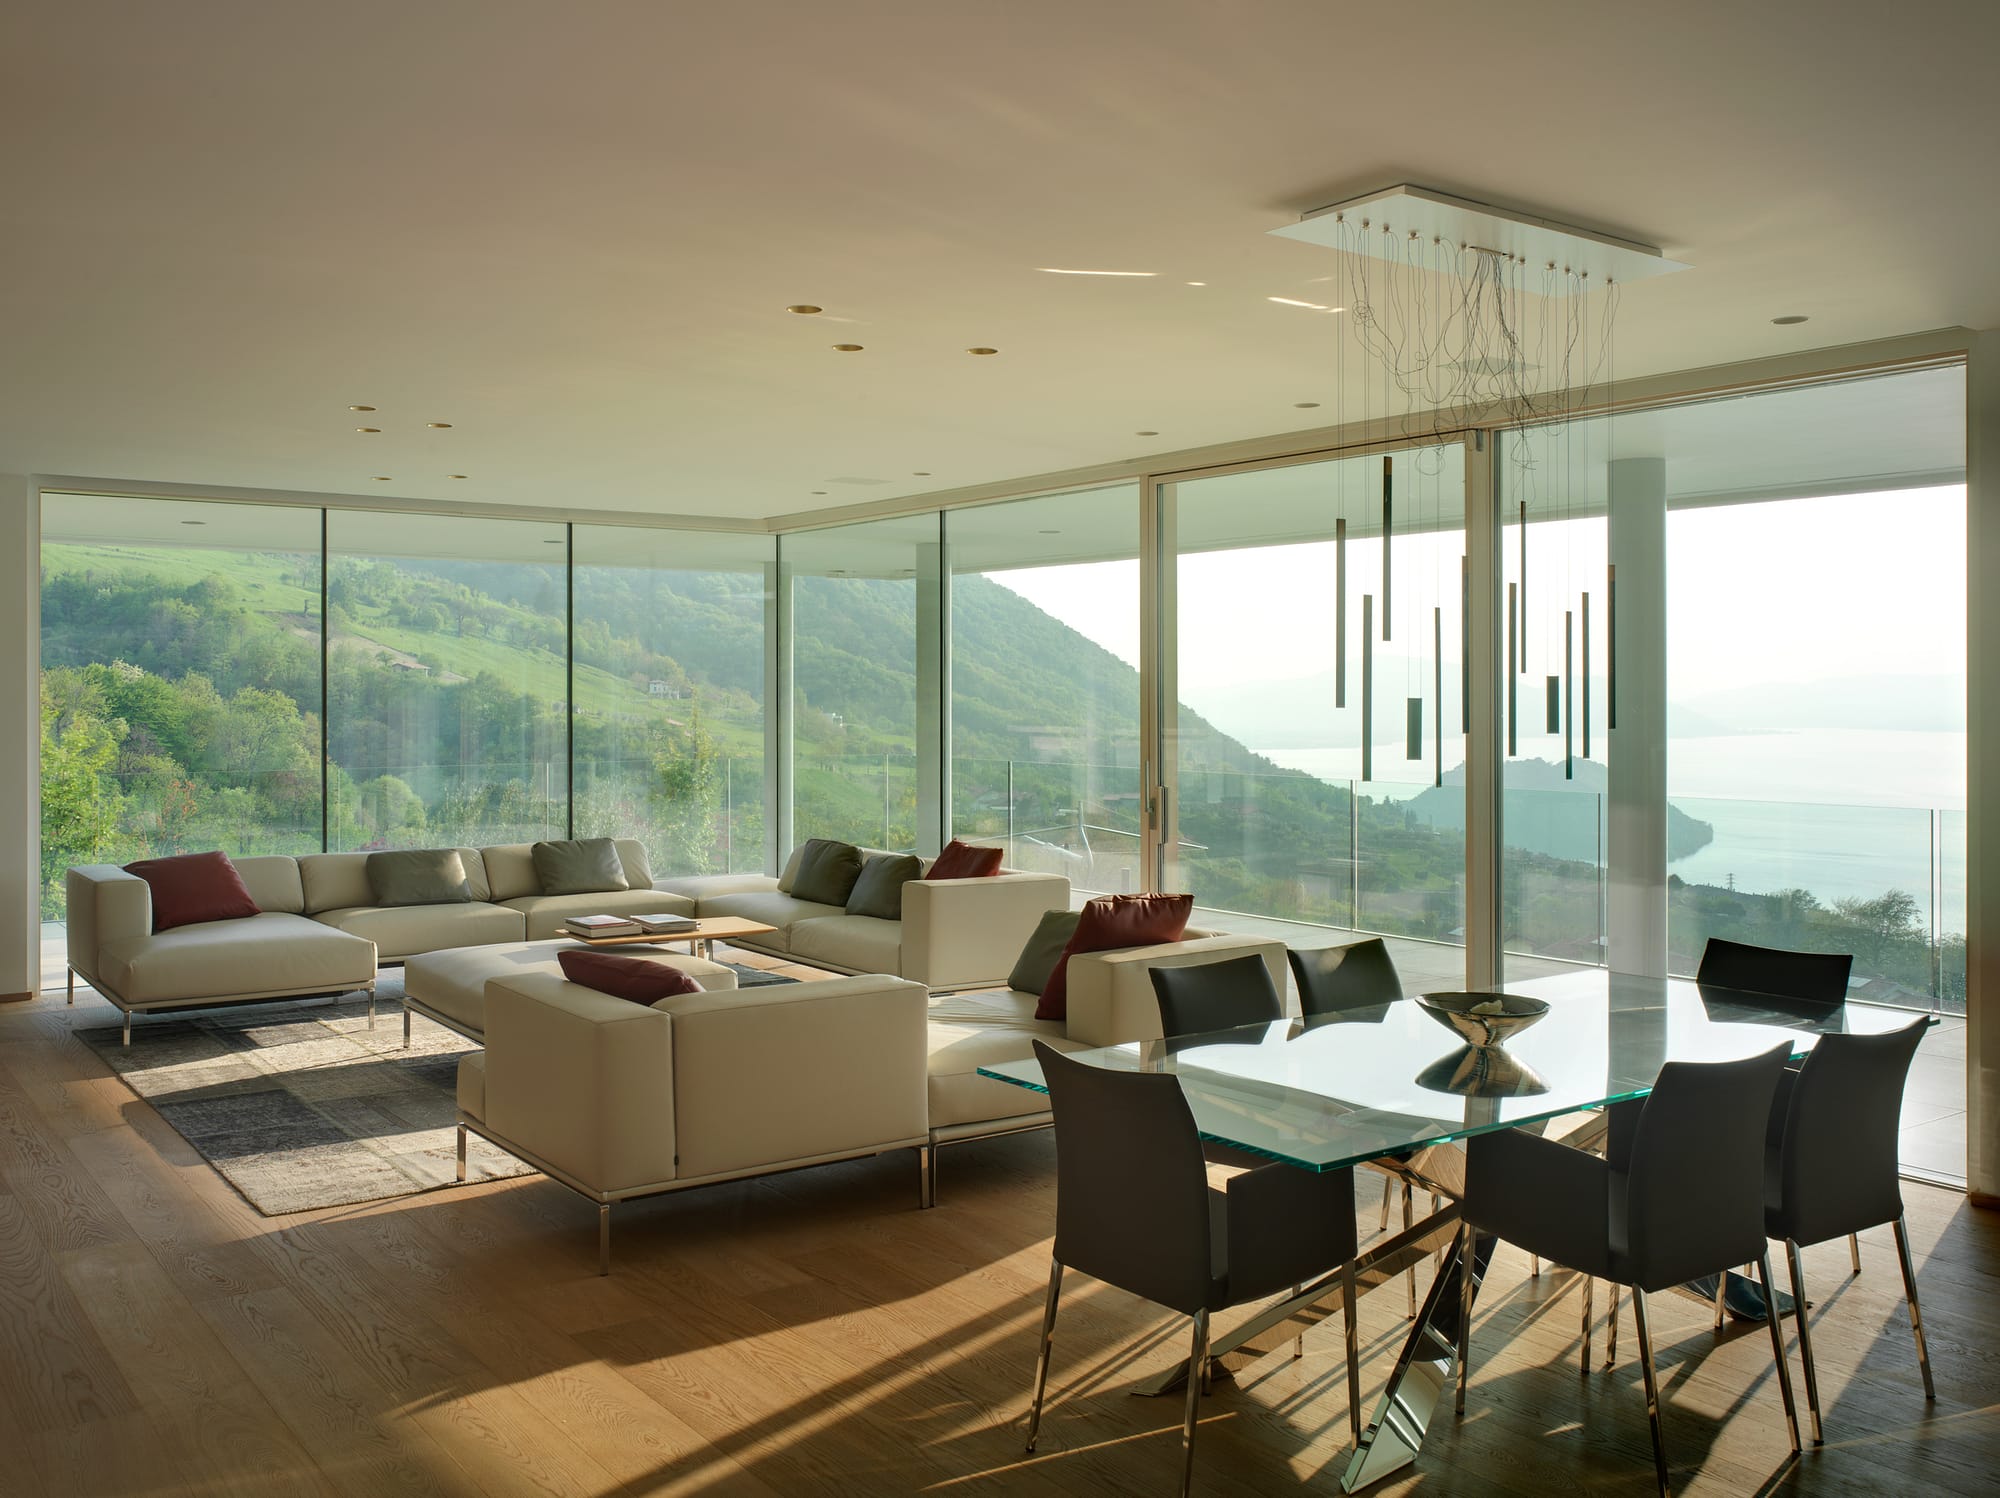 Floor to ceiling minimal frame glass windows and and oversized lift slide door provide unobstructed views